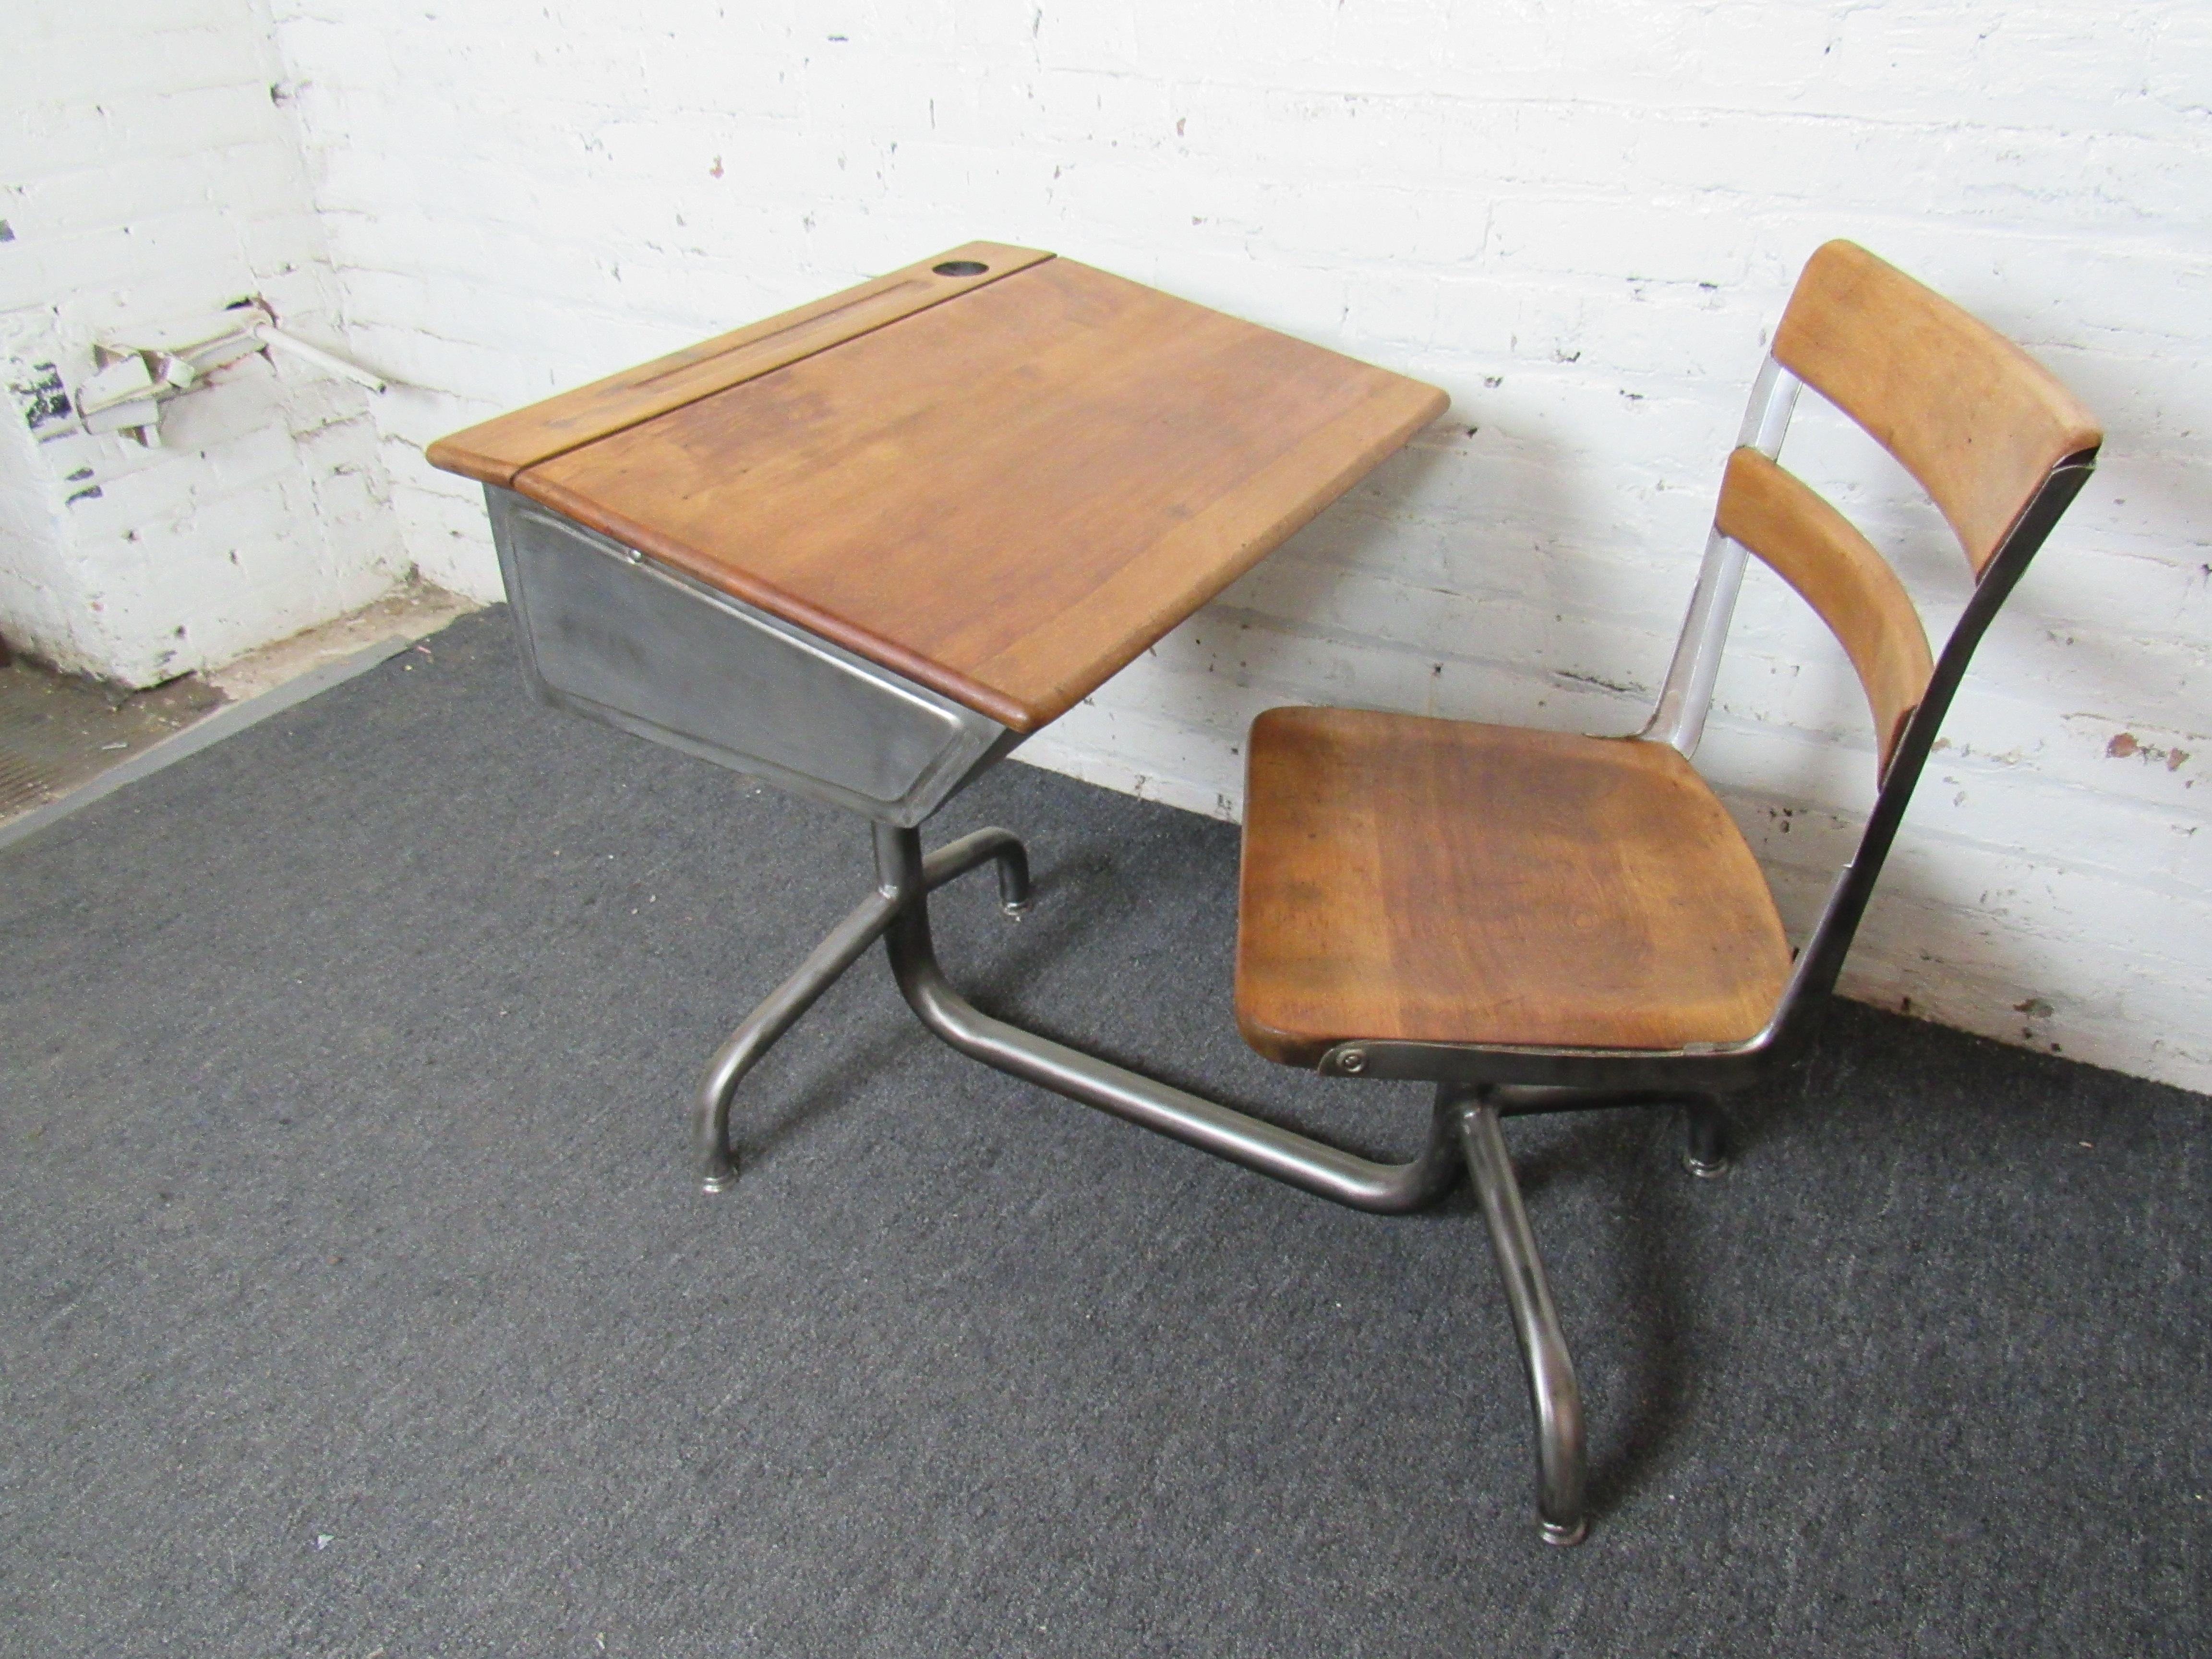 Vintage classroom desk and chair that has been beautifully refinished. The chair rests on a swiveling base, and the desktop raises to reveal a large storage compartment with an adjustable setting of a flat or slanted writing surface. Please confirm